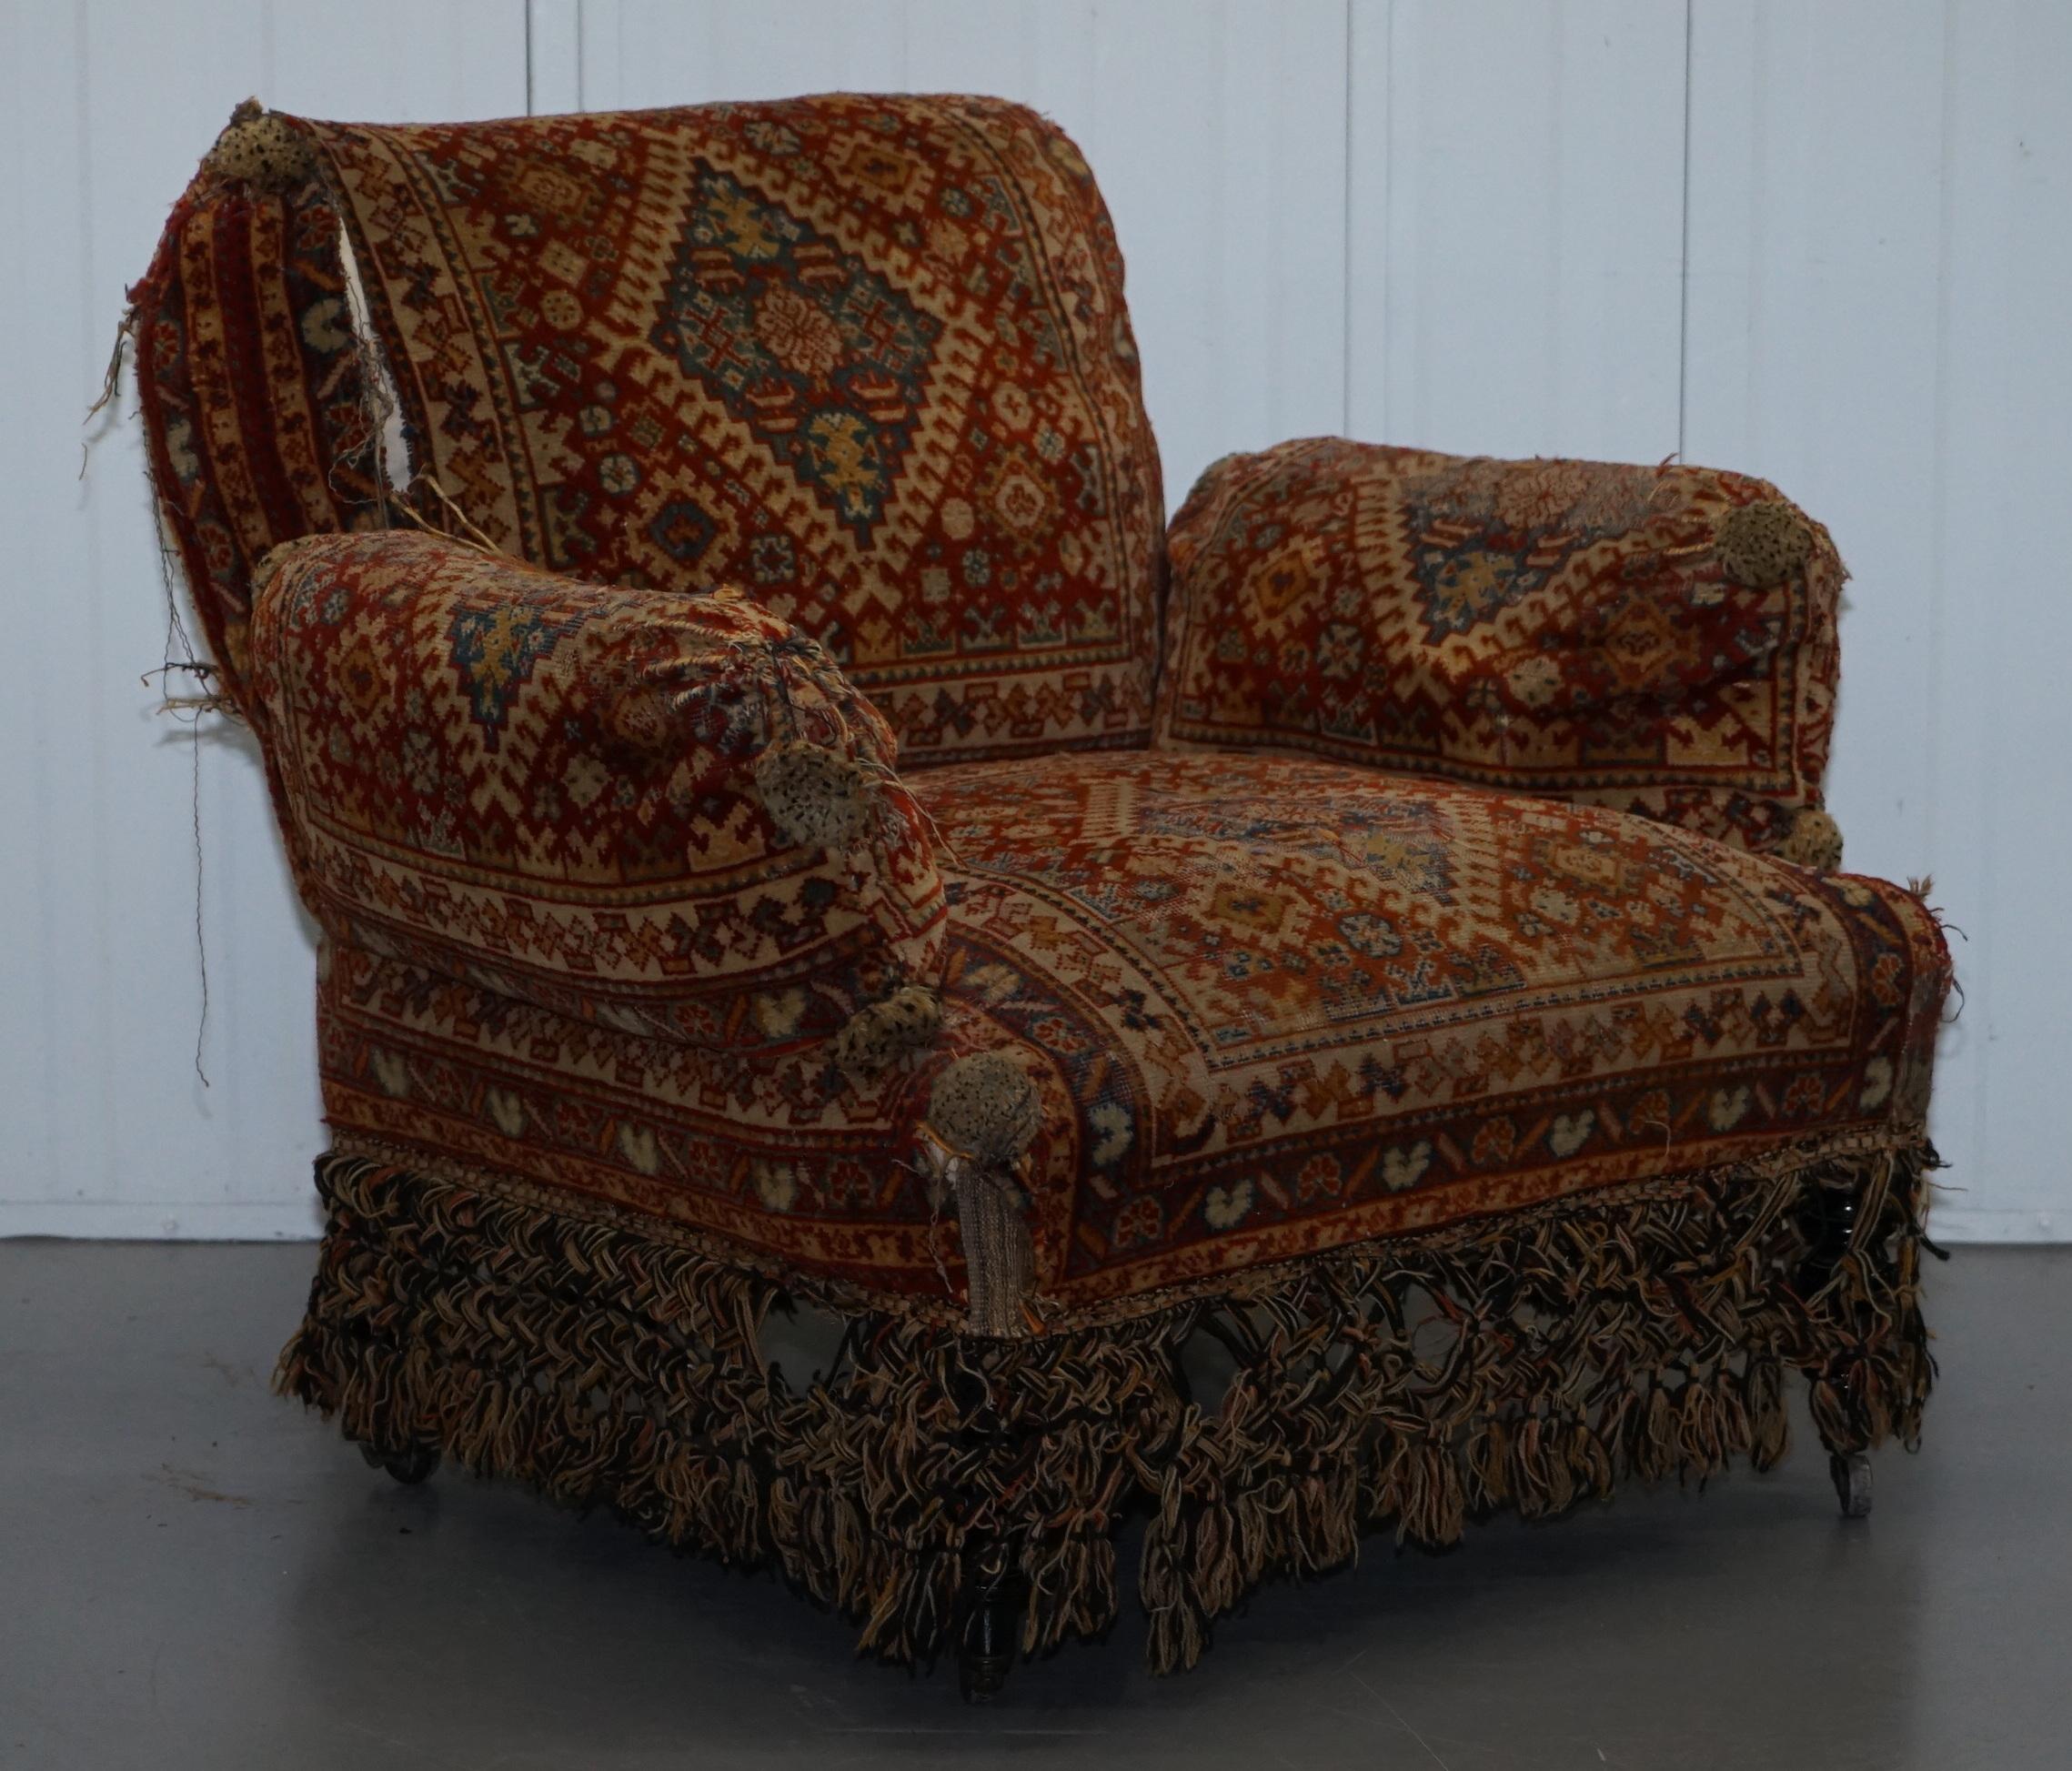 We are delighted to offer for sale this stunning and very rare circa 1810-1820 Regency Turkey work pair of armchairs original period upholstery

A very rare well made and decorative pair of chairs, turkey work is a form of knotted embroidery